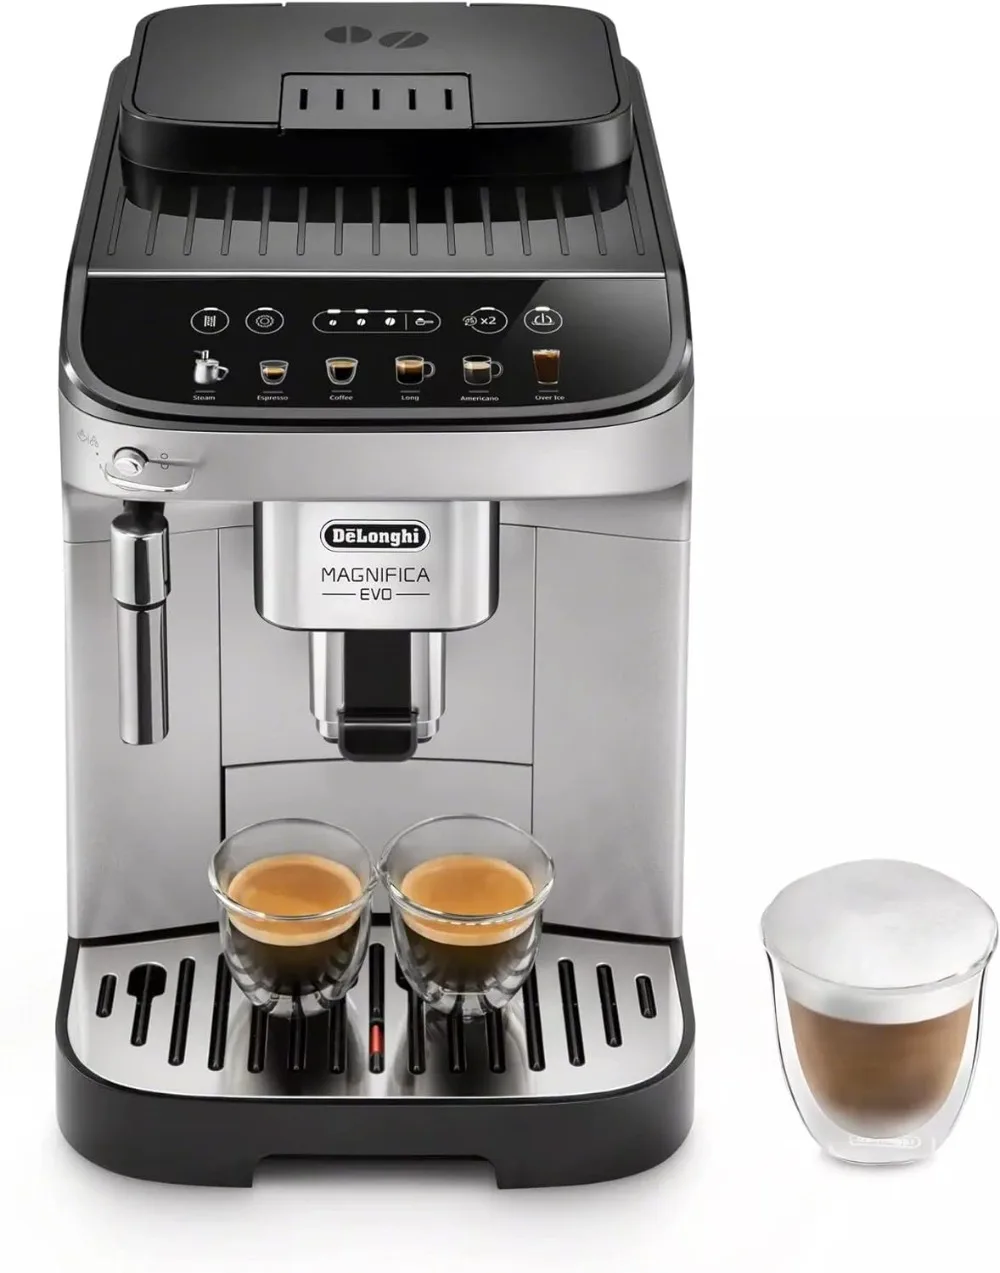 

De'Longhi Magnifica Evo, Fully Automatic Machine Bean to Cup Espresso Cappuccino and Iced Coffee Maker, Colored Touch Display